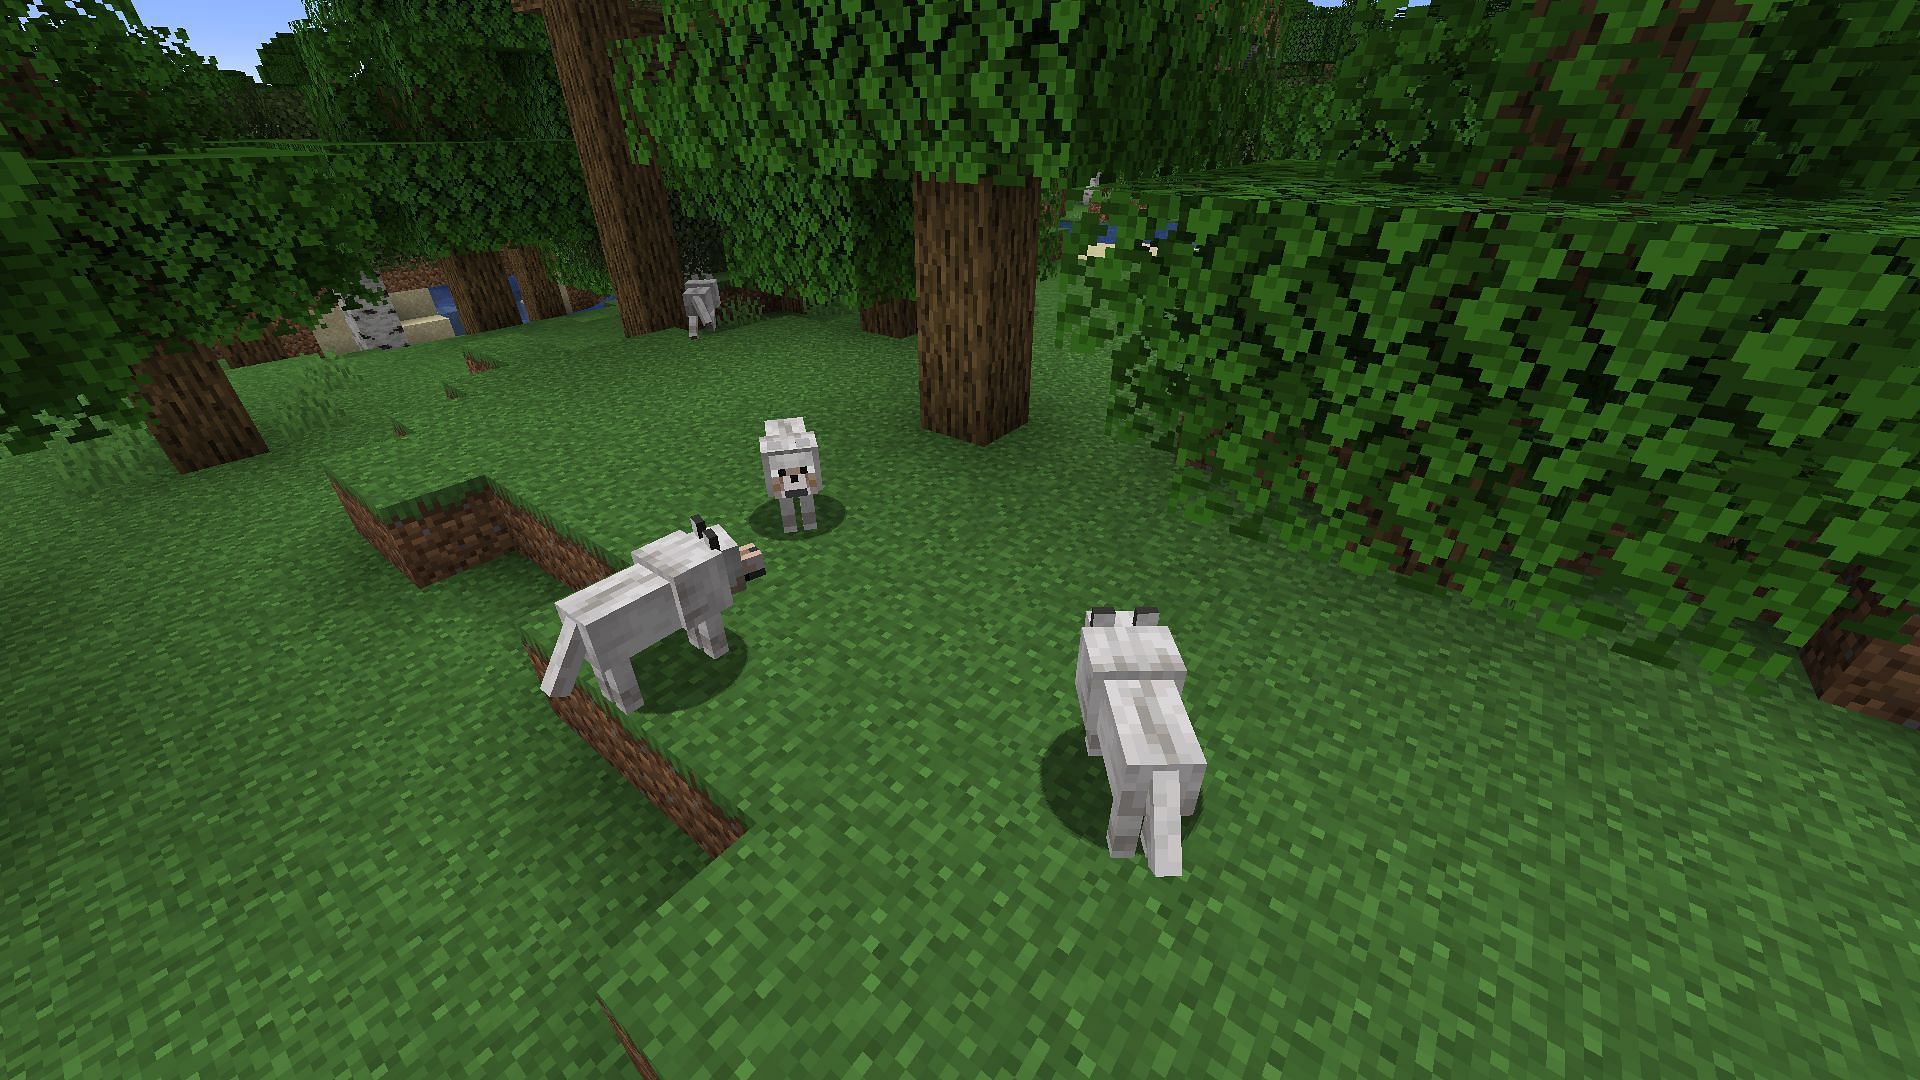 A pack of wolves in a forest biome (Image via Minecraft)